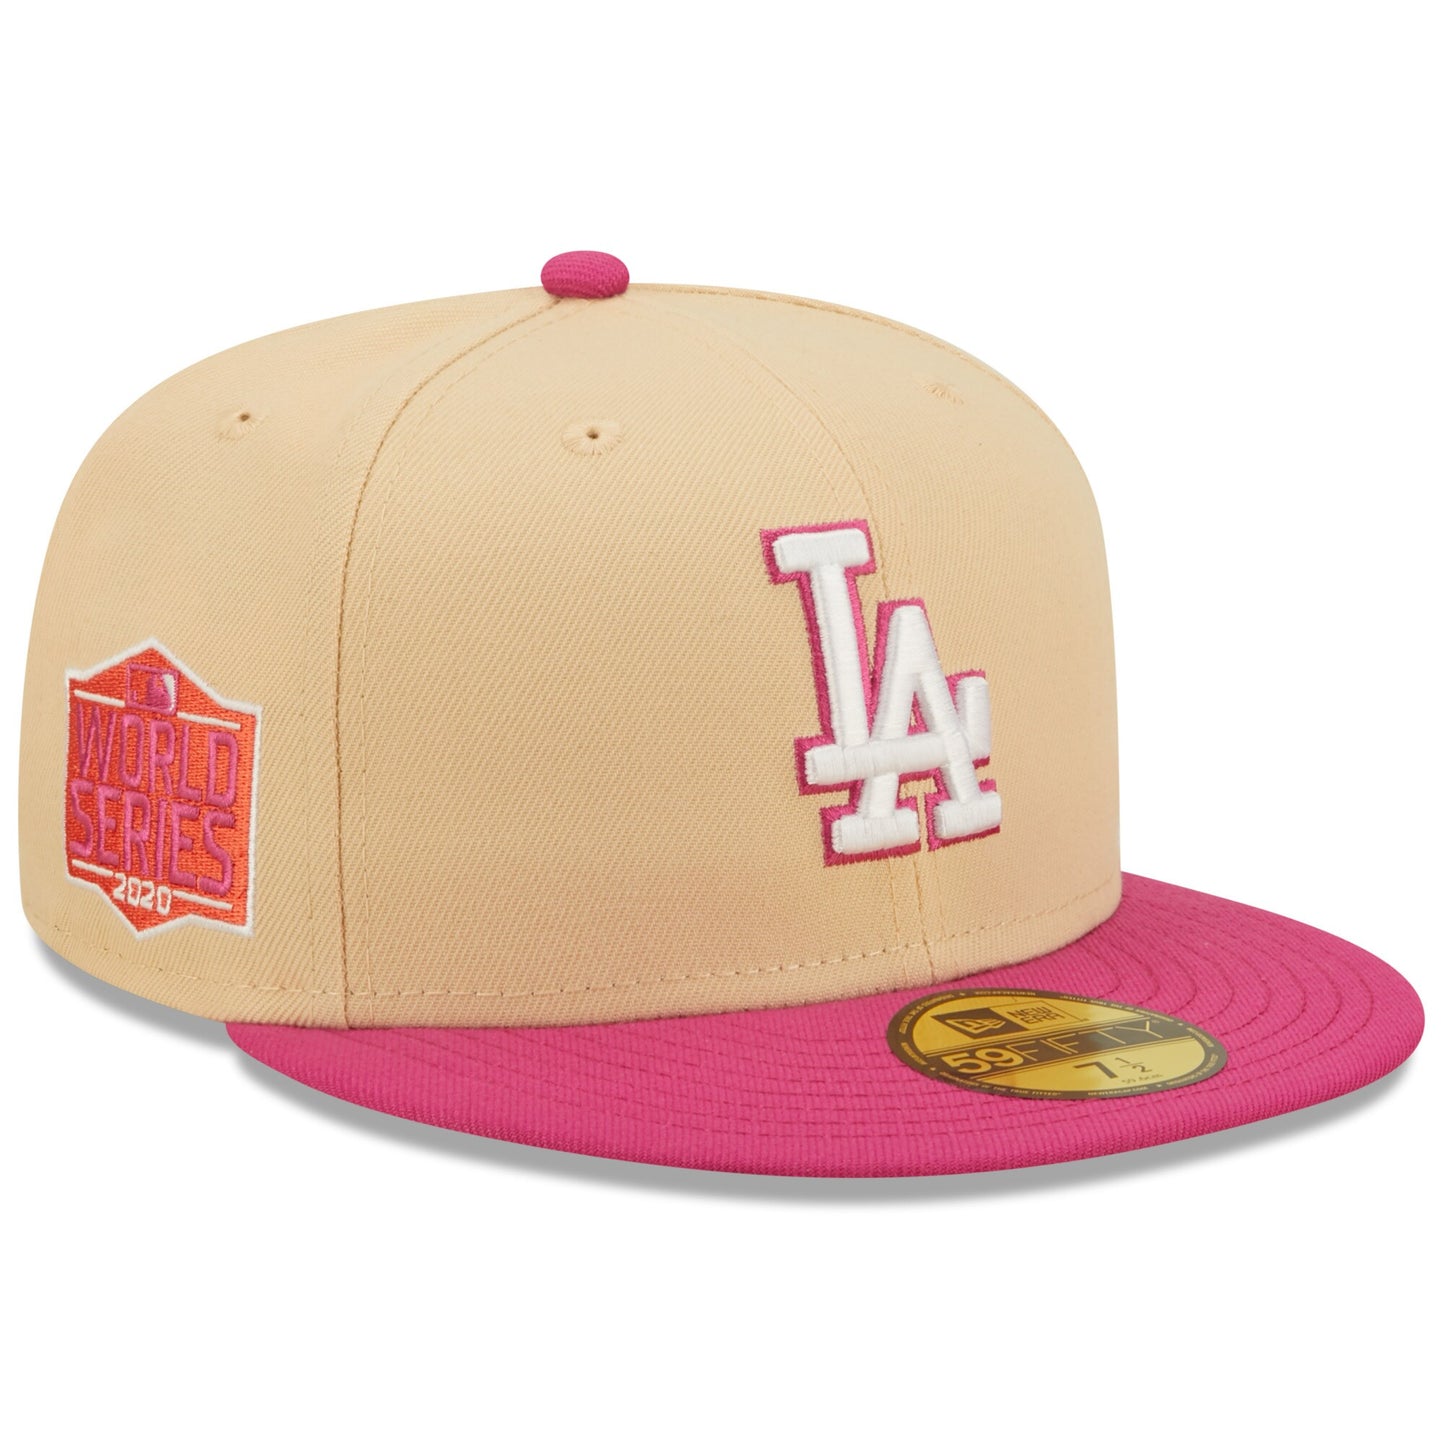 Los Angeles Dodgers New Era 2020 World Series Mango Passion 59FIFTY Fitted Hat - Orange/Pink